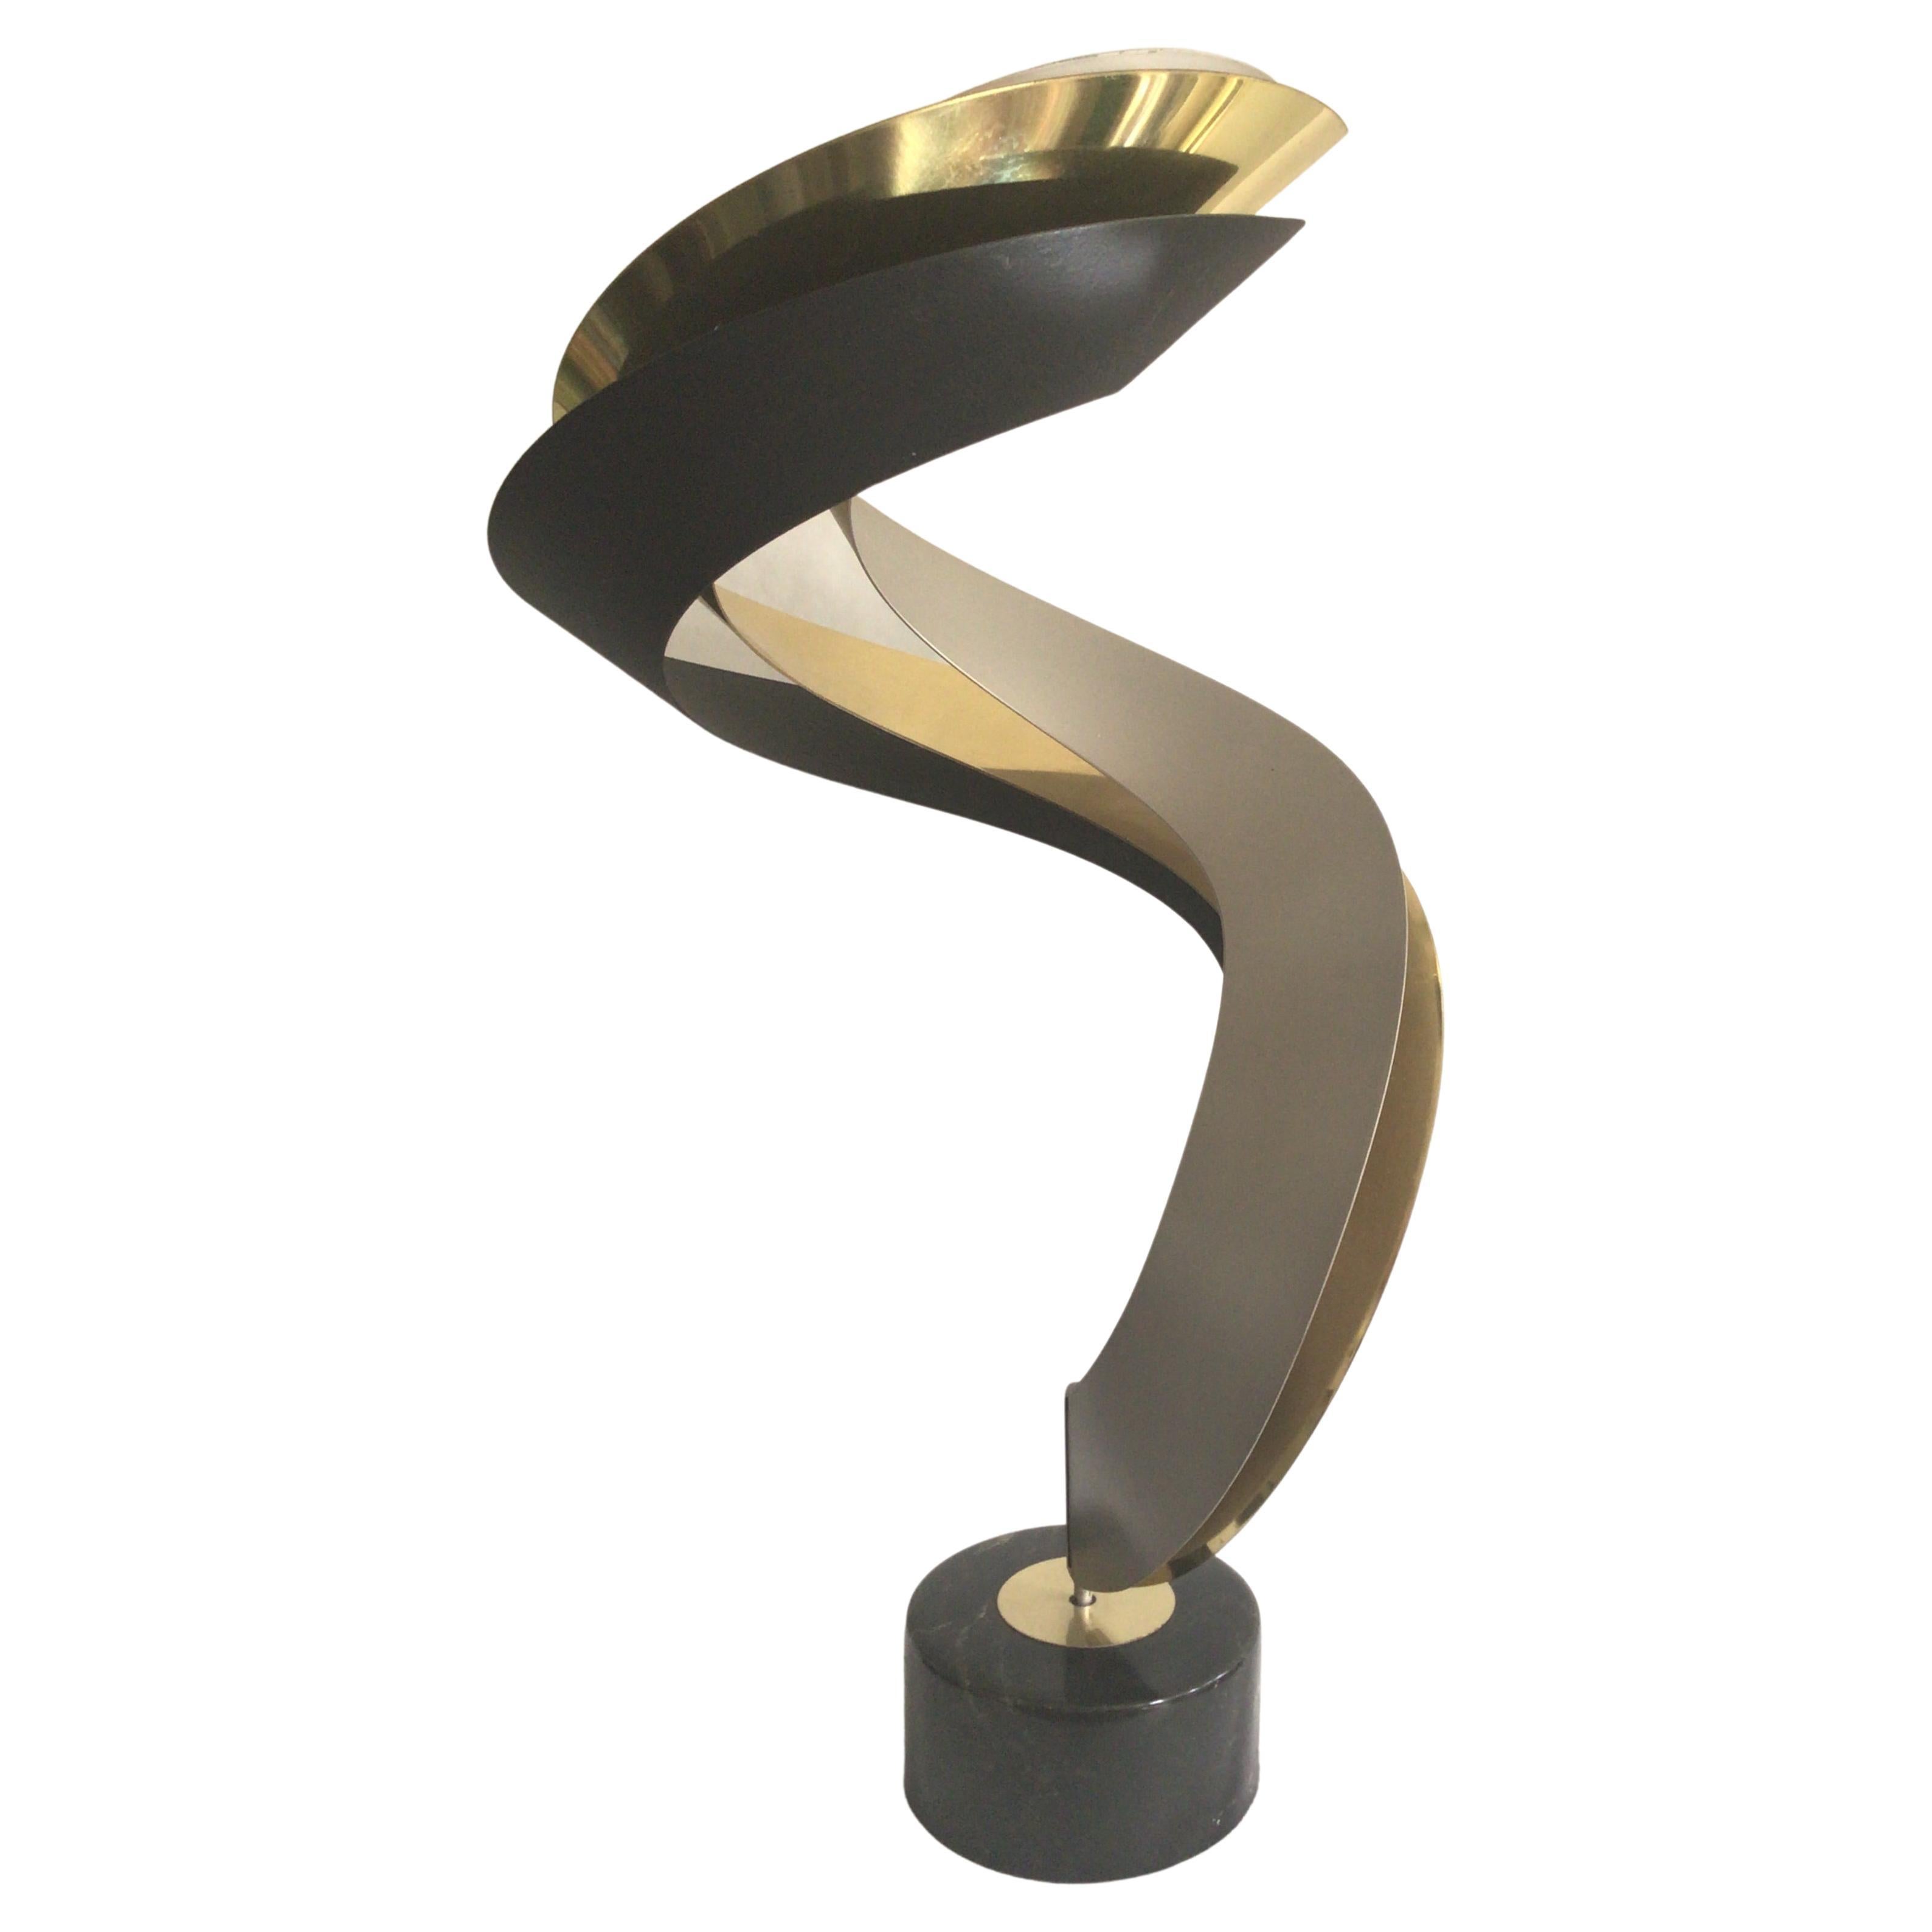 1980s Brass Steel and Aluminum Swirled Sculpture on Swivel Base For Sale